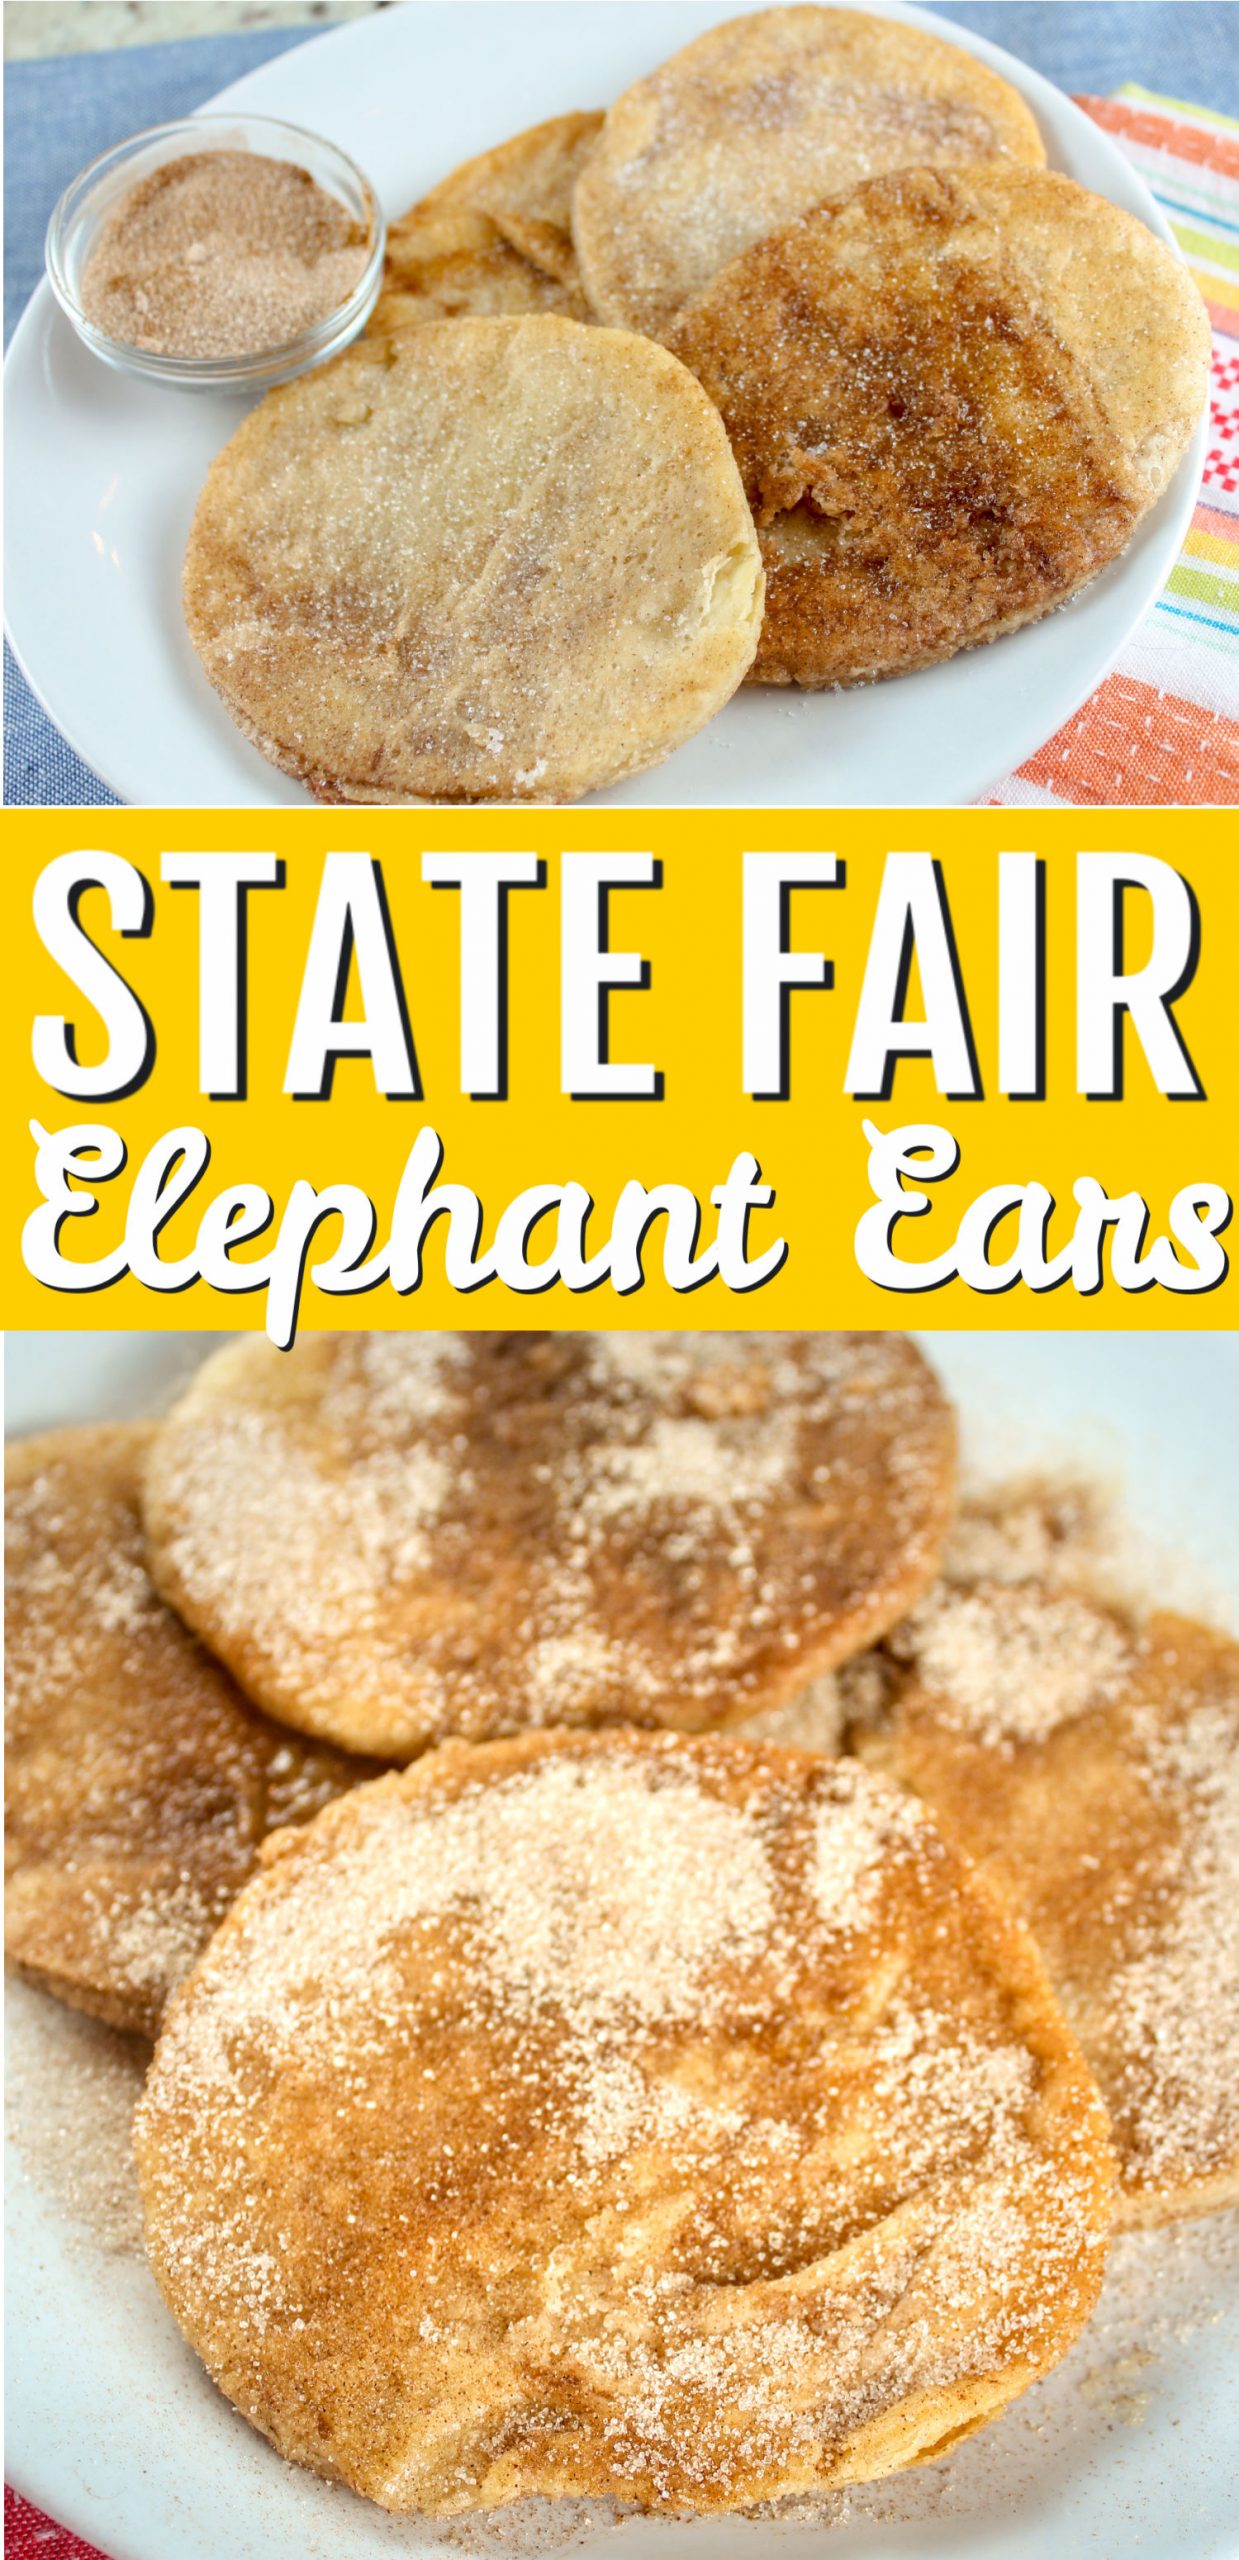 We're all missing the State Fair this year - but you can still make your own Copycat Elephant Ears with just a few ingredients! via @foodhussy